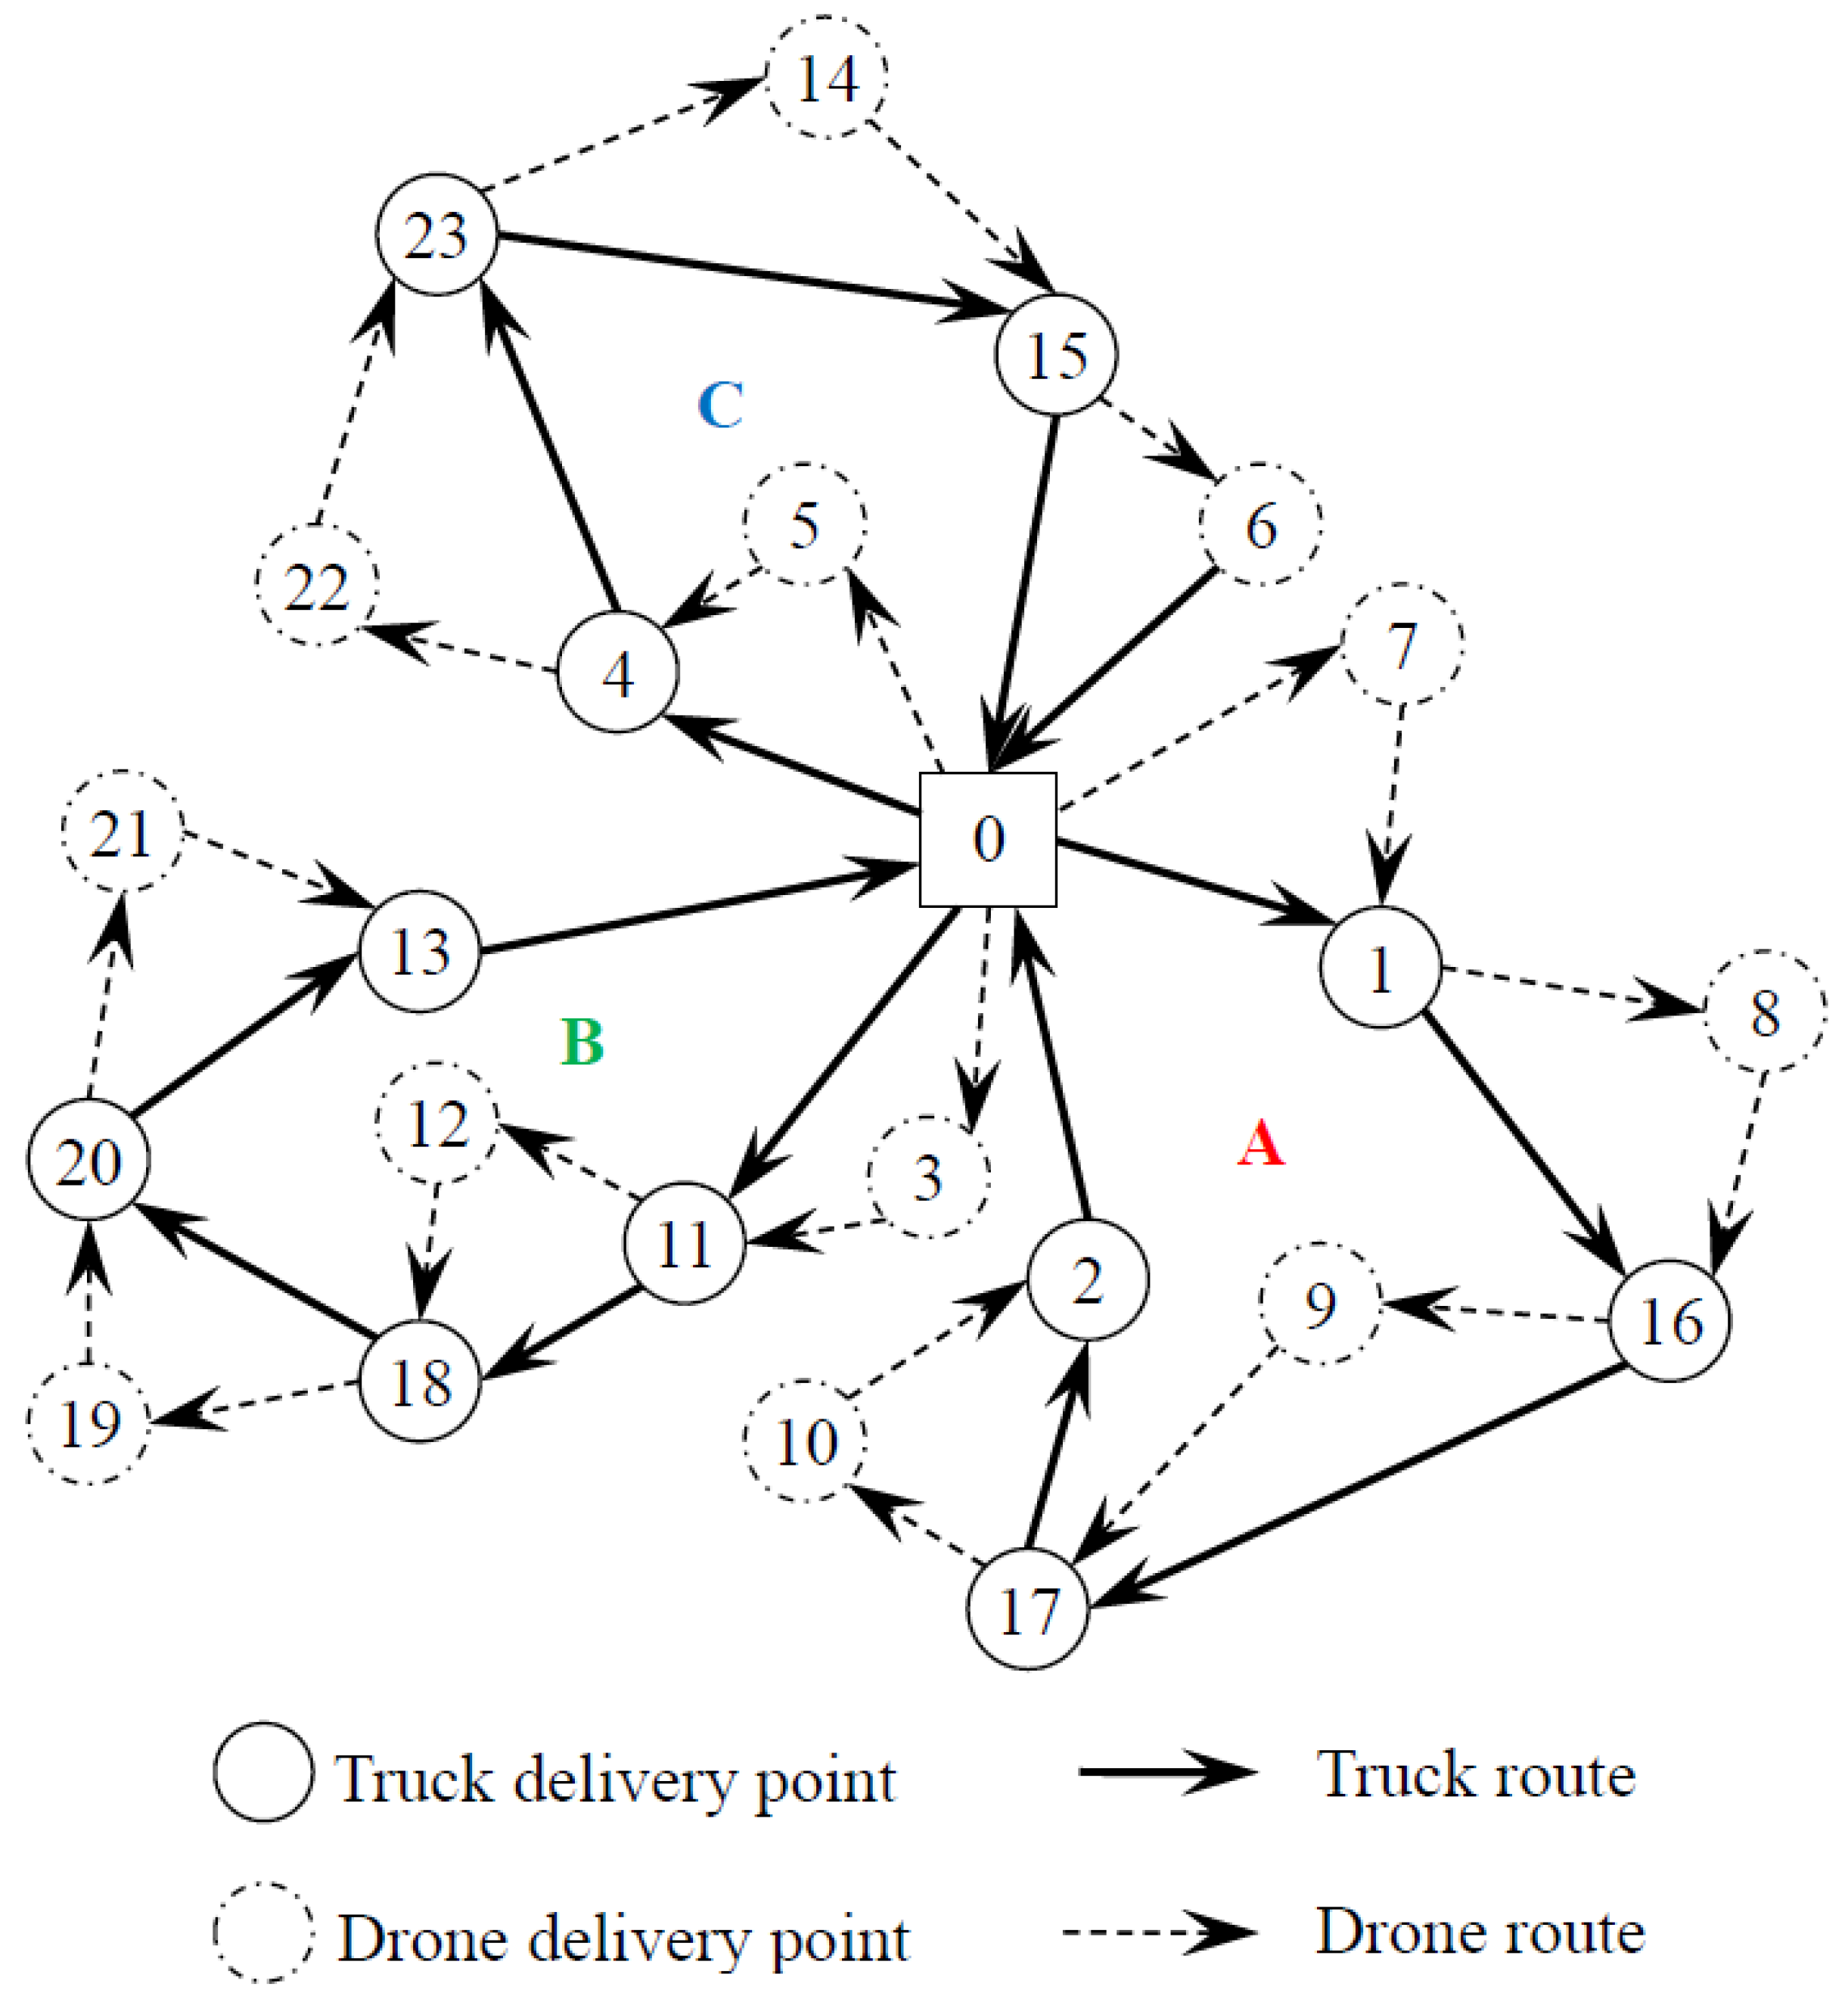 Applied Sciences | Free Full-Text | Optimal Route Planning for Truck&ndash;Drone  Delivery Using Variable Neighborhood Tabu Search Algorithm | HTML